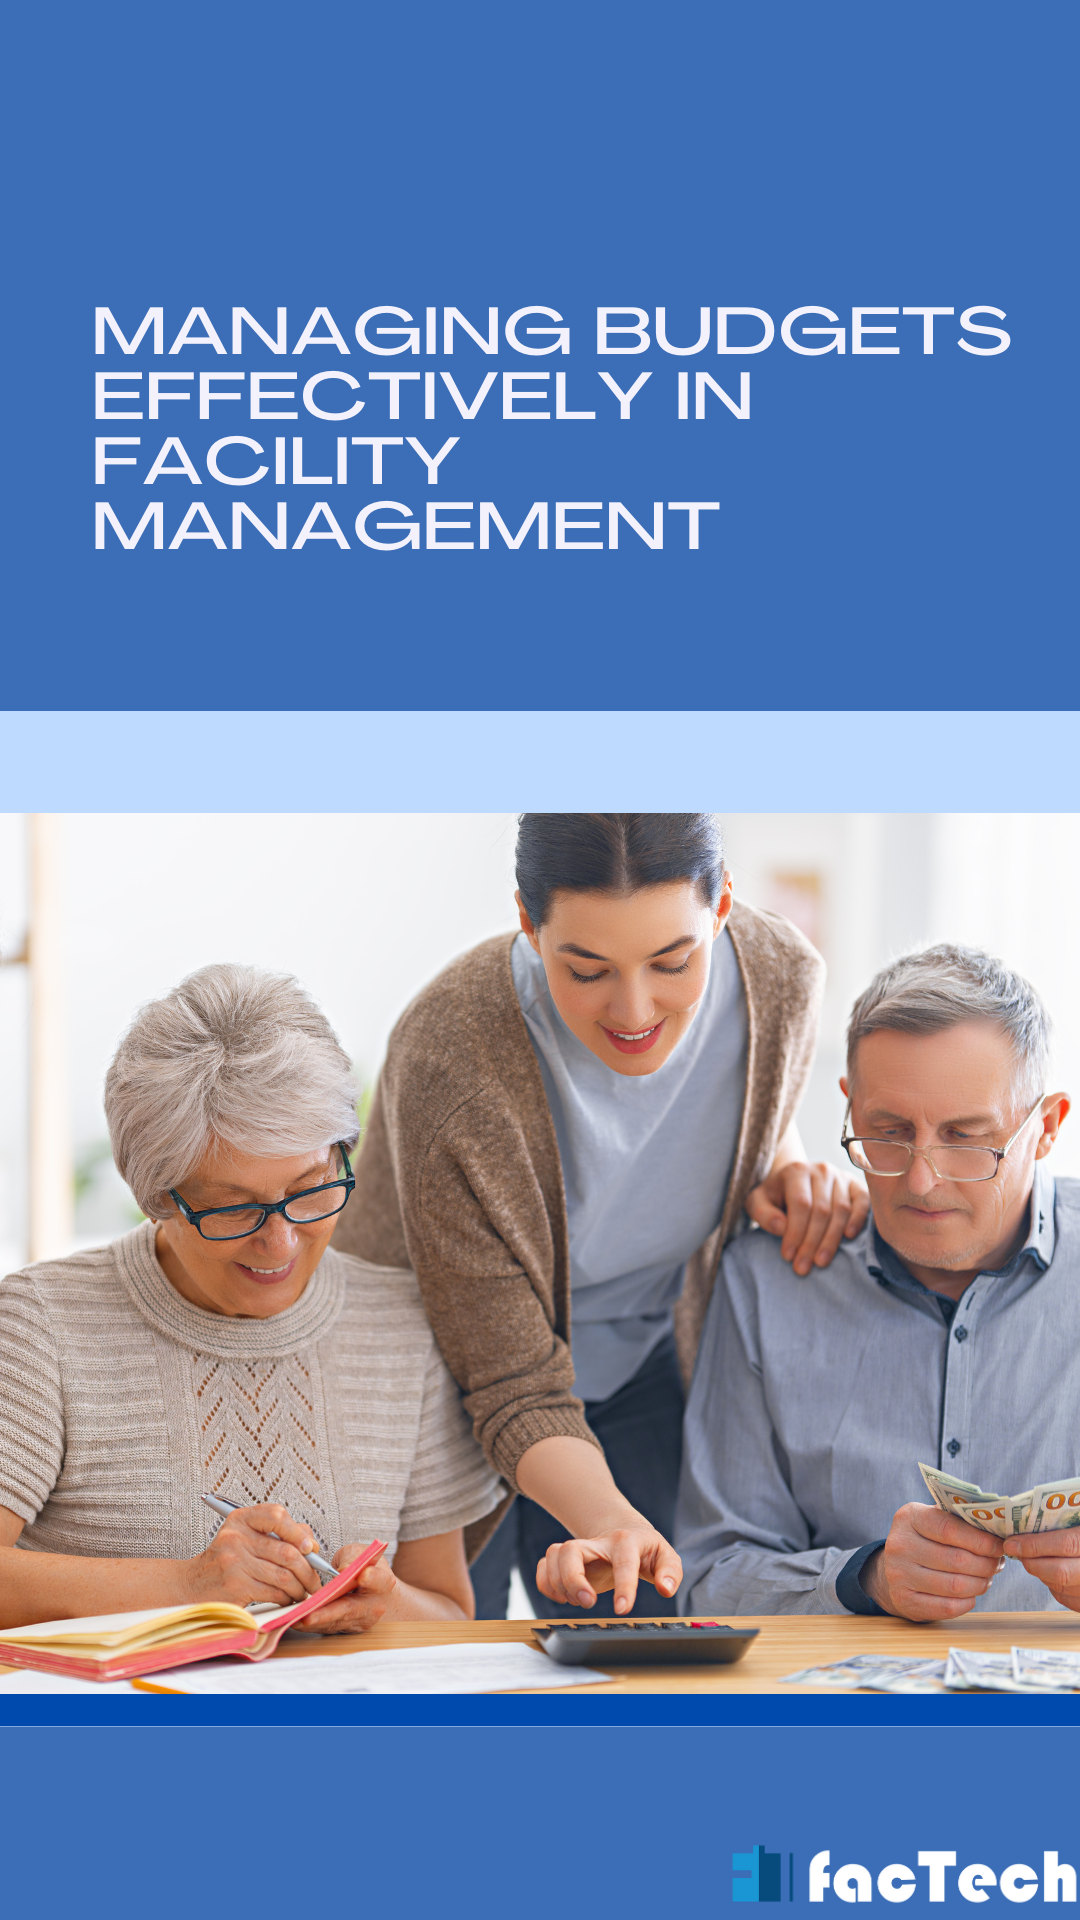 Managing Budgets Effectively in Facility Management